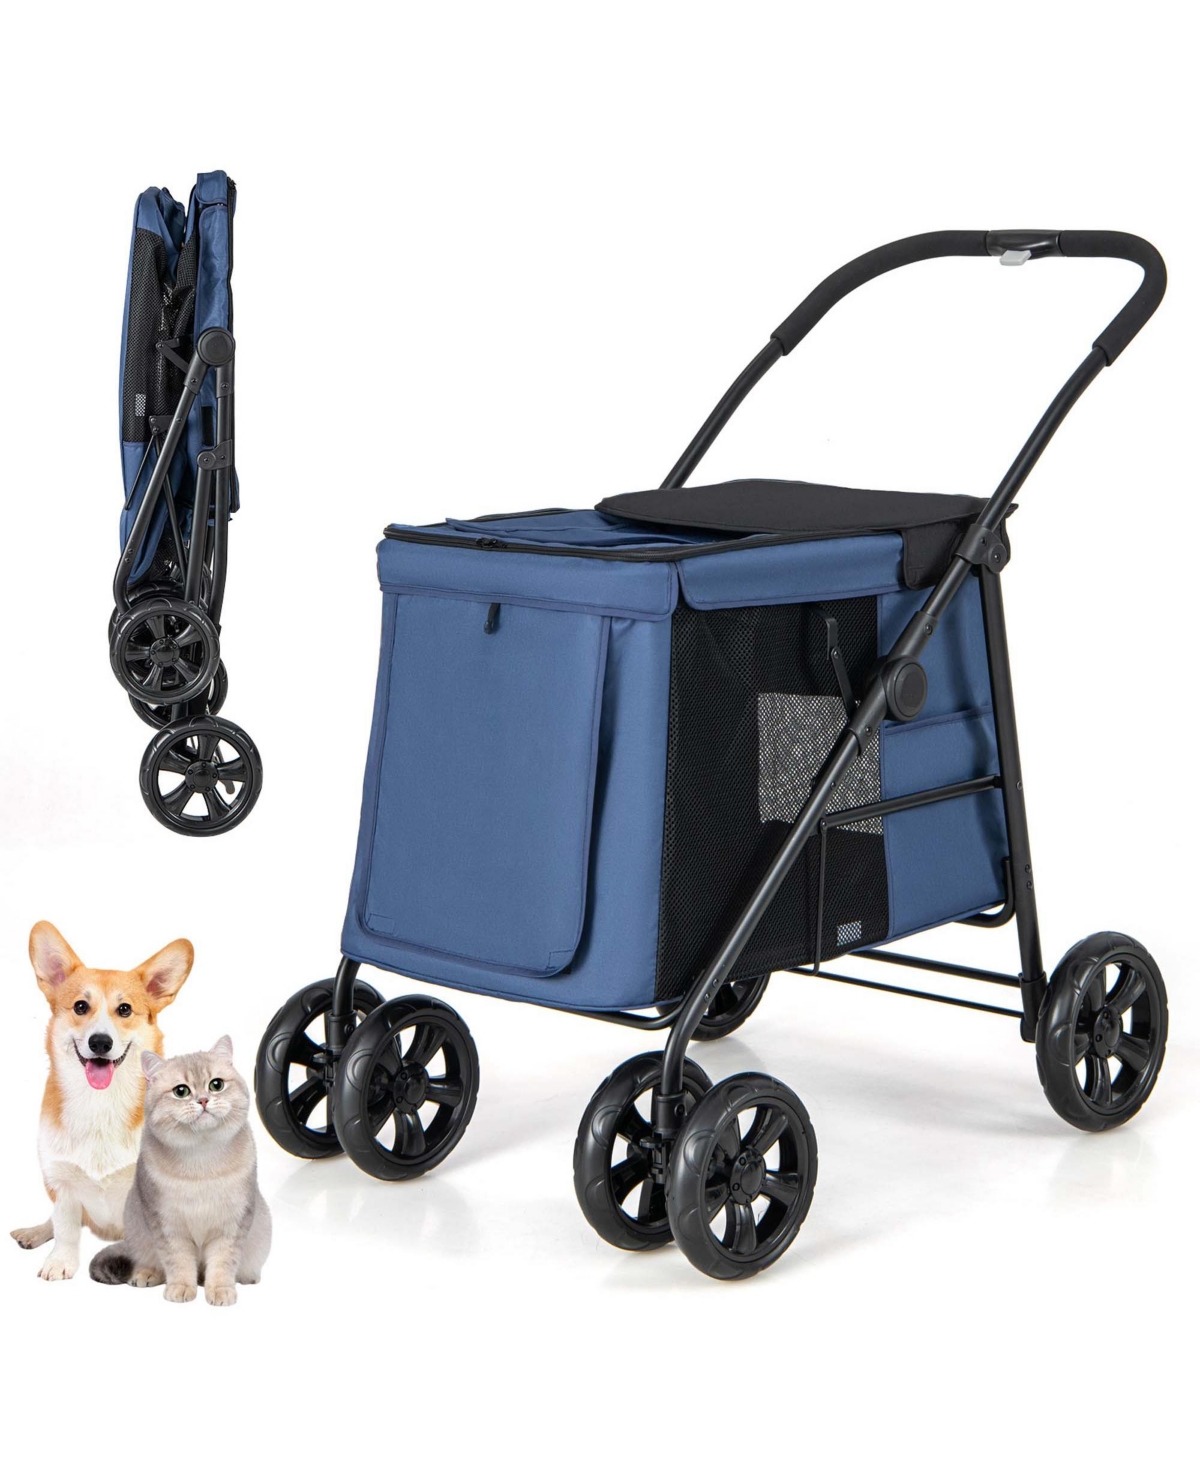 4-Wheel Folding Pet Stroller with Breathable Mesh for Small & Medium Pets - Grey